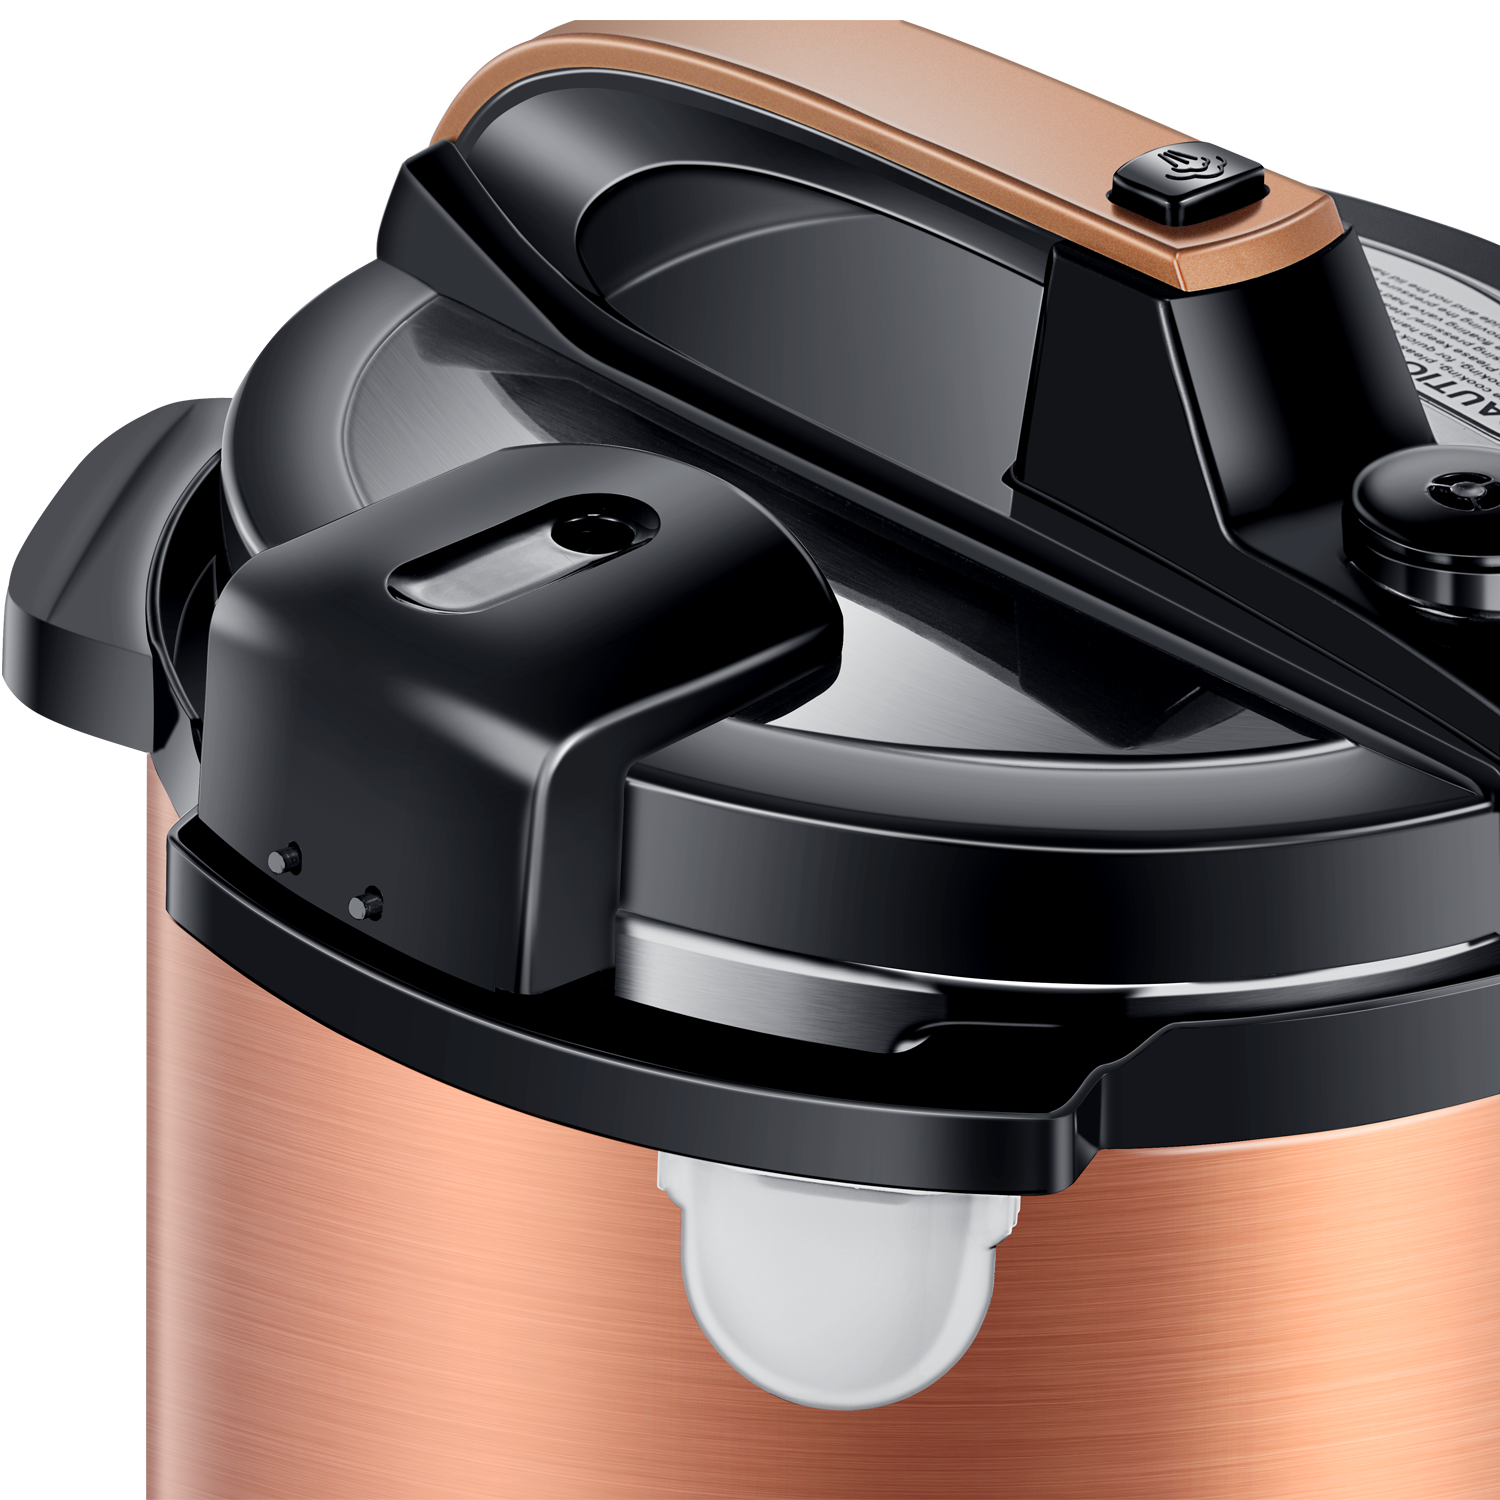 Copper 12-in-1 Pressure Cooker with Measuring Cup and Spoon, Stainless Steel Rack and Steam Basket (6Qt, 8Qt, 10Qt, 12.5Qt) - GoWISE USA